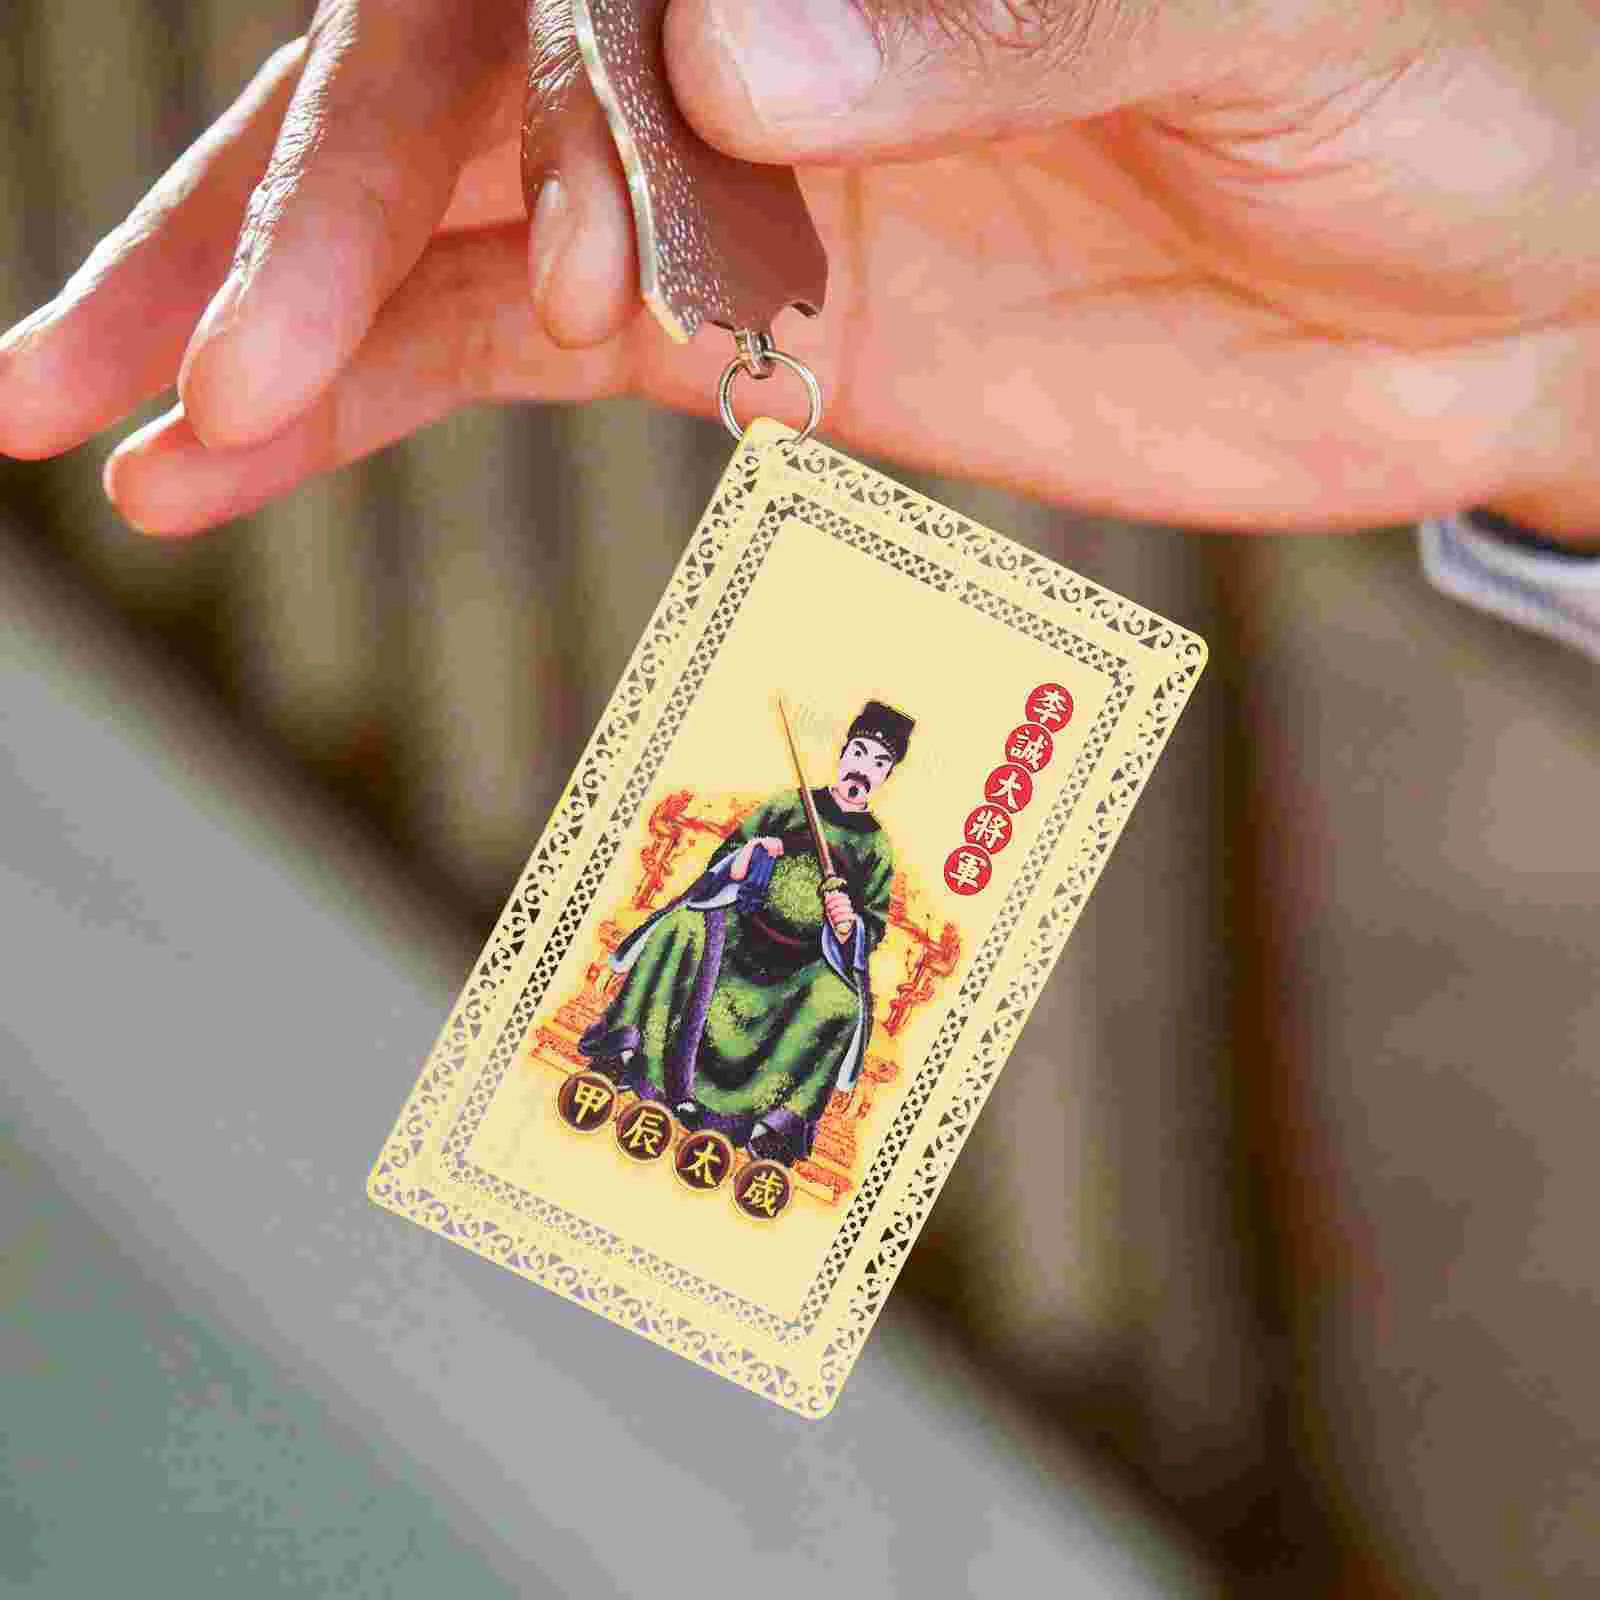 Chinese Amulet Card Luck Wealth Protection Card Auspicious Card Success Protection Card